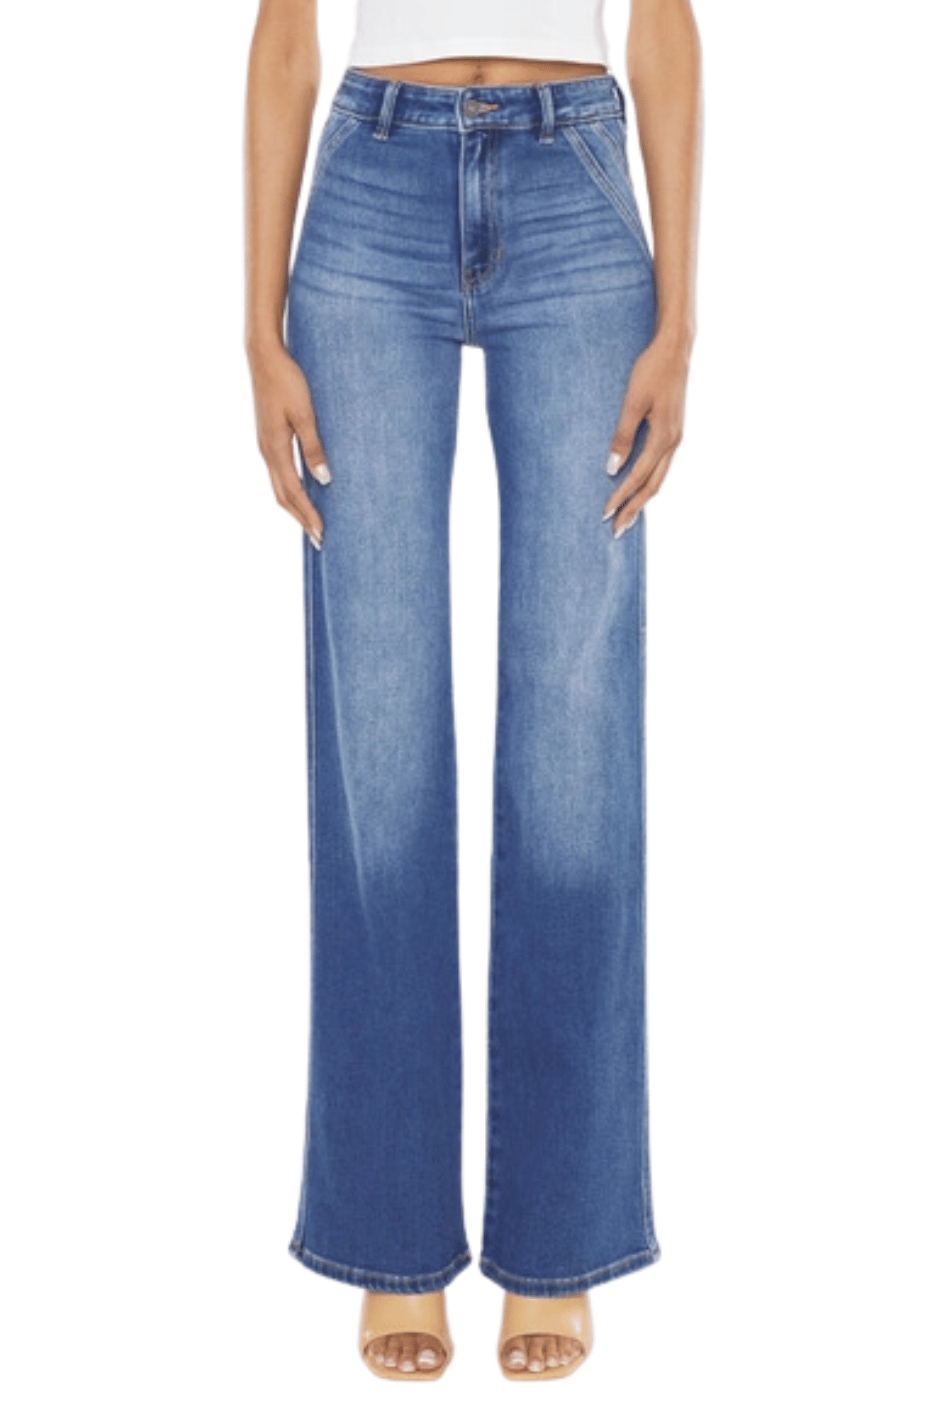 Celia Ultra High Rise Wide Flare Jeans - Expressive Collective CO.